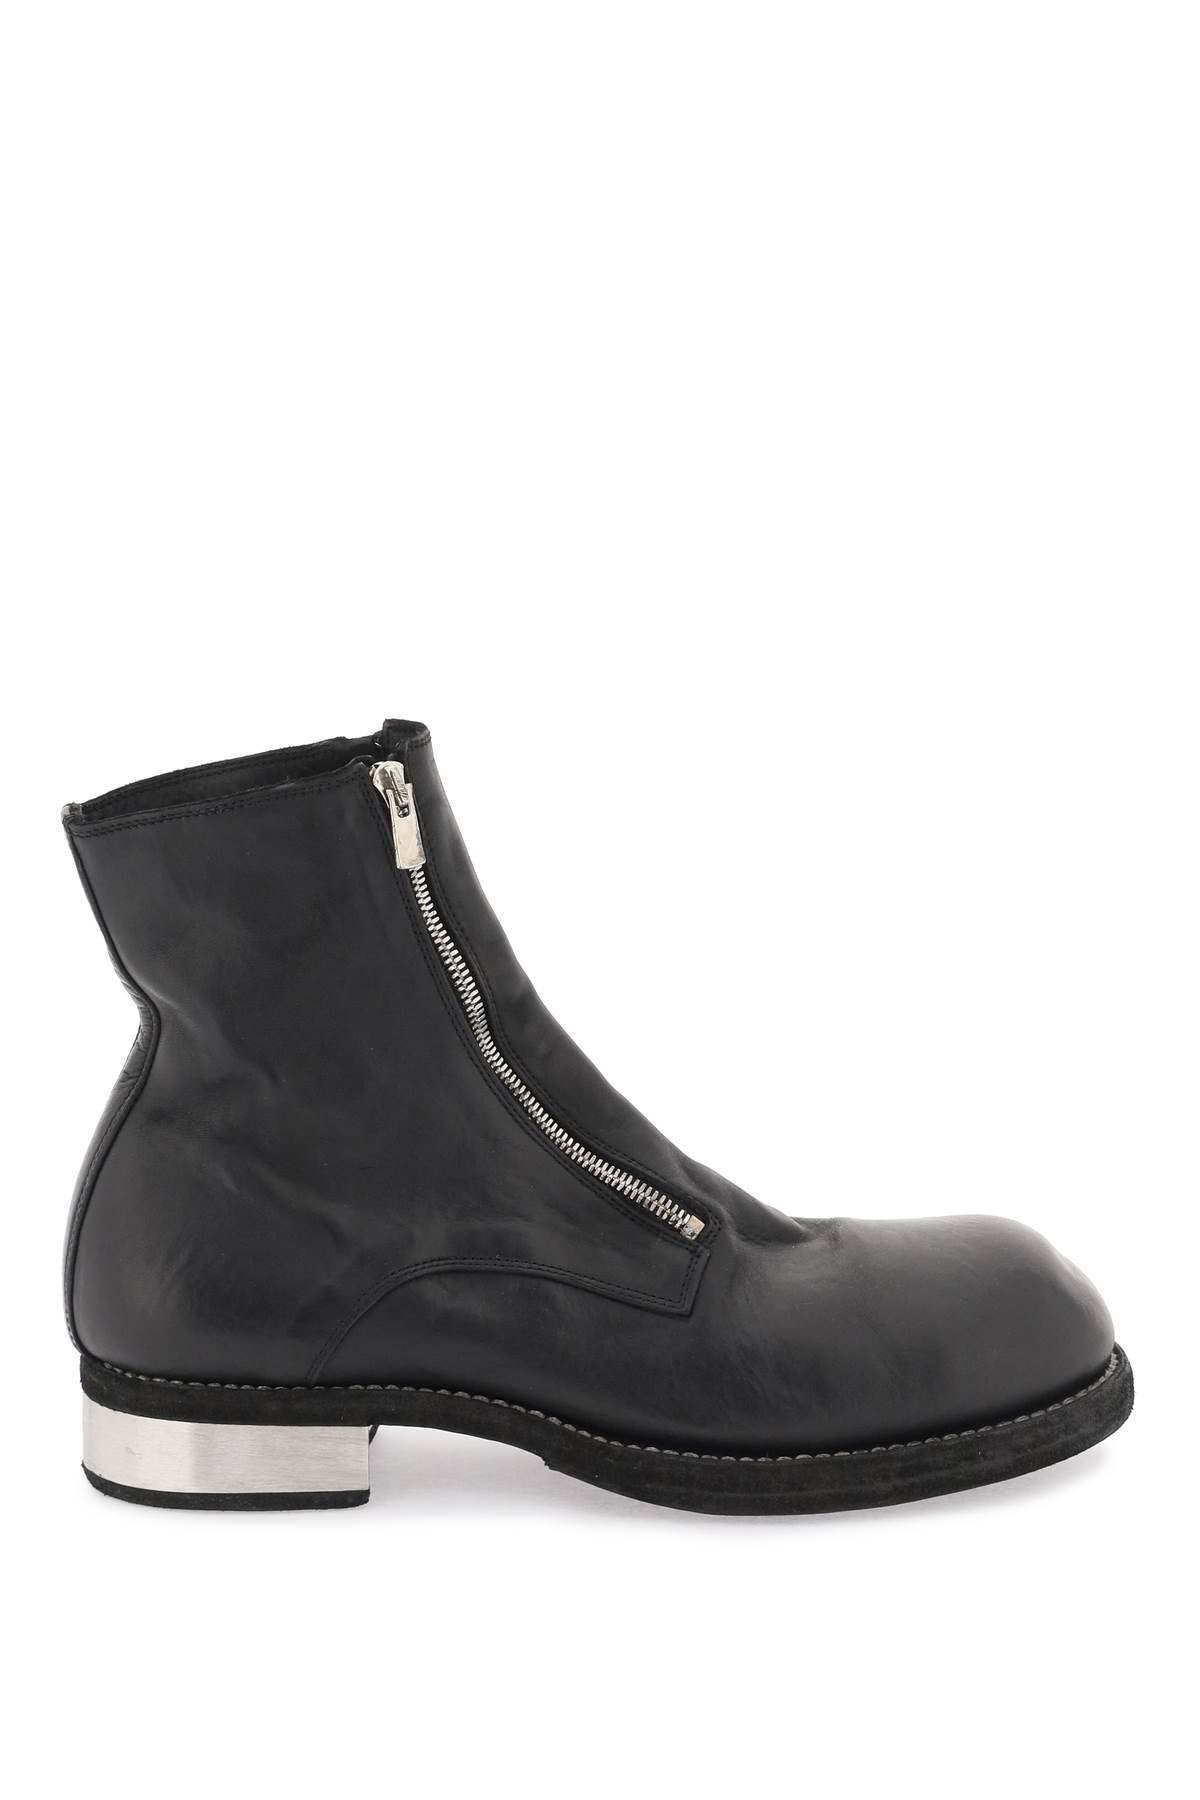 Guidi Leather Double Zip Ankle Boots   Black